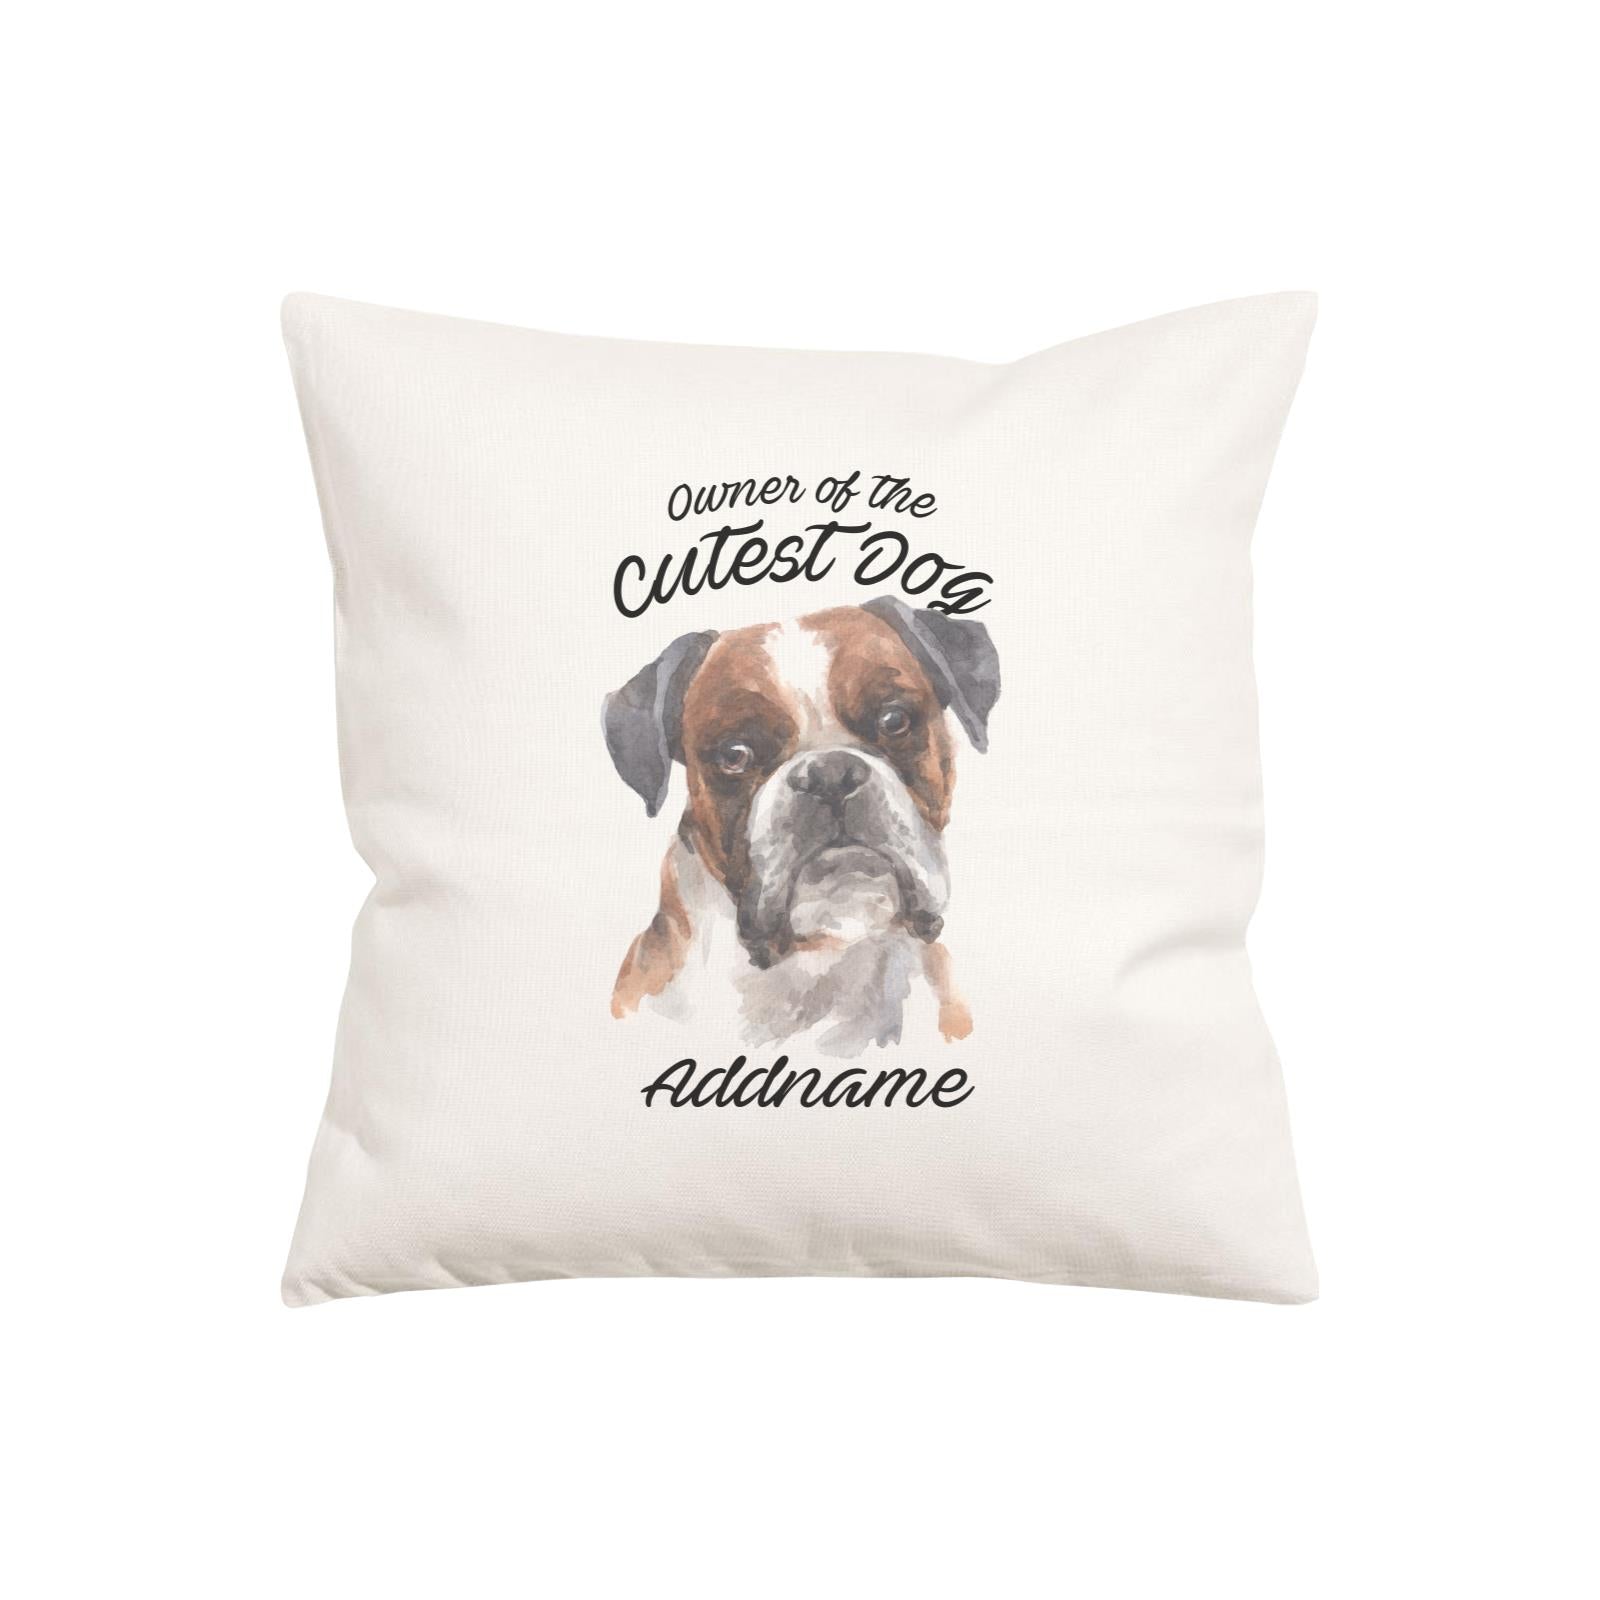 Watercolor Dog Owner Of The Cutest Dog Boxer Black Ears Addname Pillow Cushion